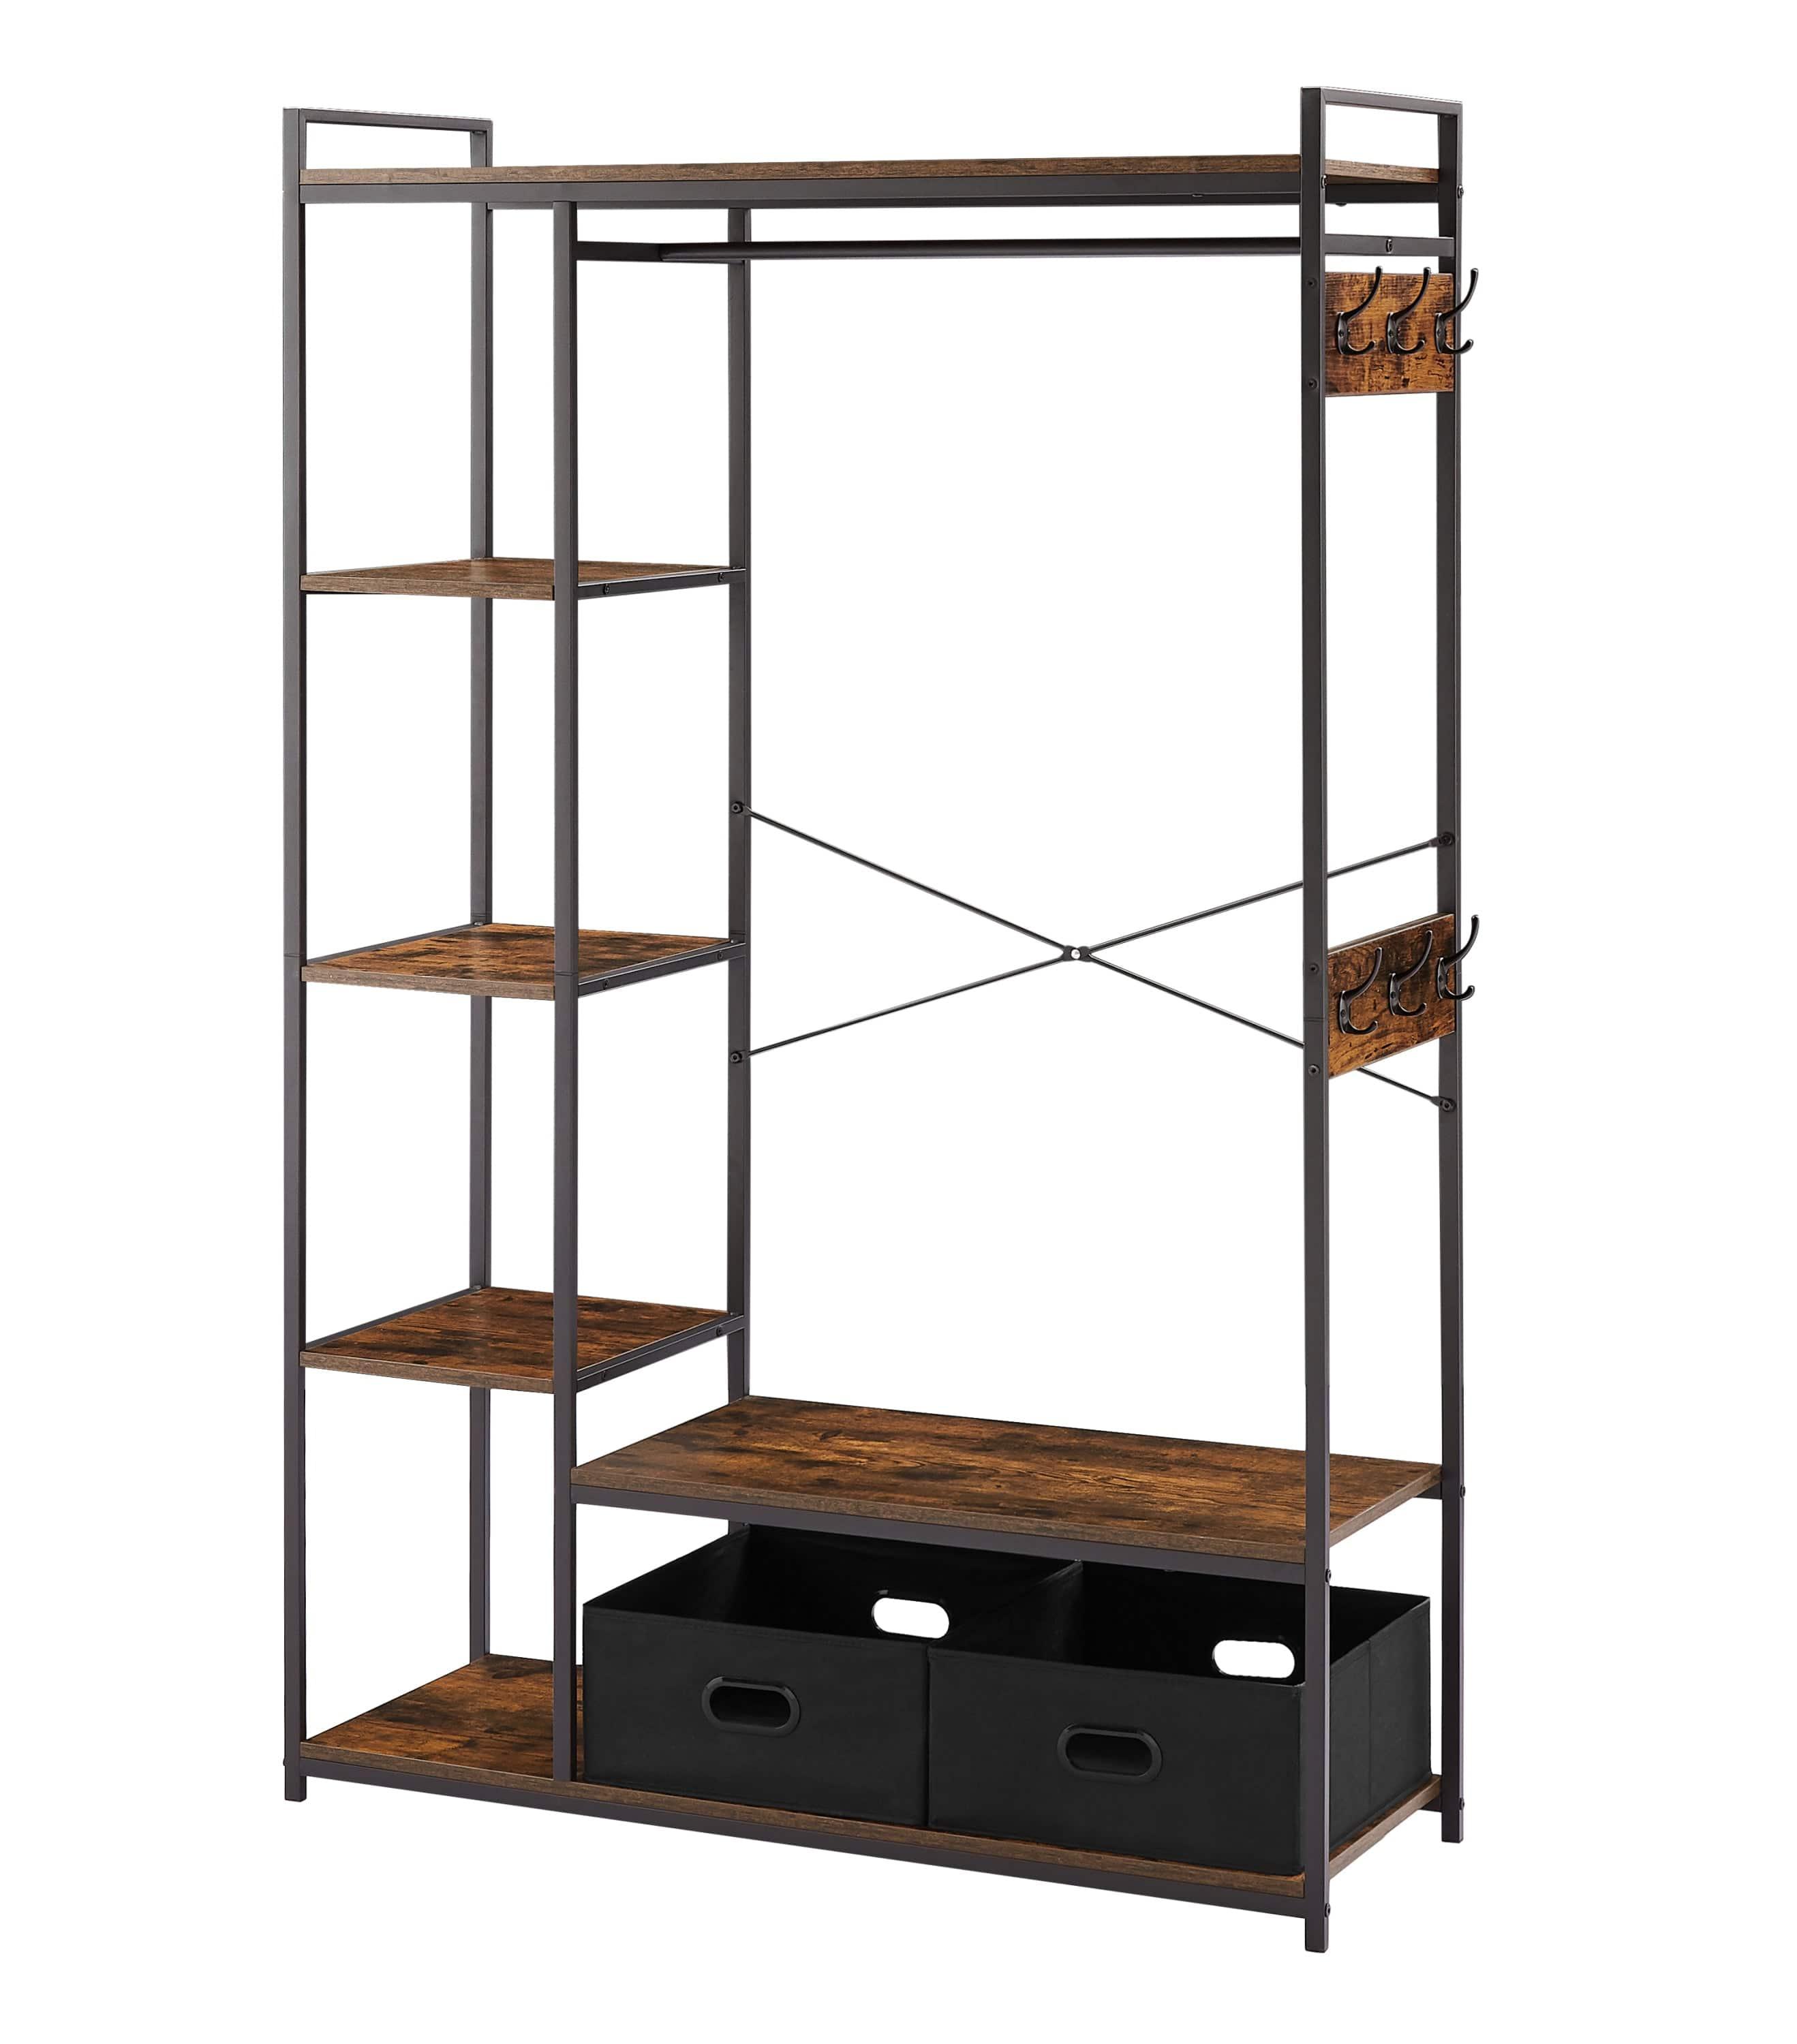 Shop JHX Organized Garment Rack with Storage, Free-Standing Closet System with Open Shelves and Hanging Rod(Rustic Brown,43.7’’w x 15.75’’d x 70.08’’h). Mademoiselle Home Decor